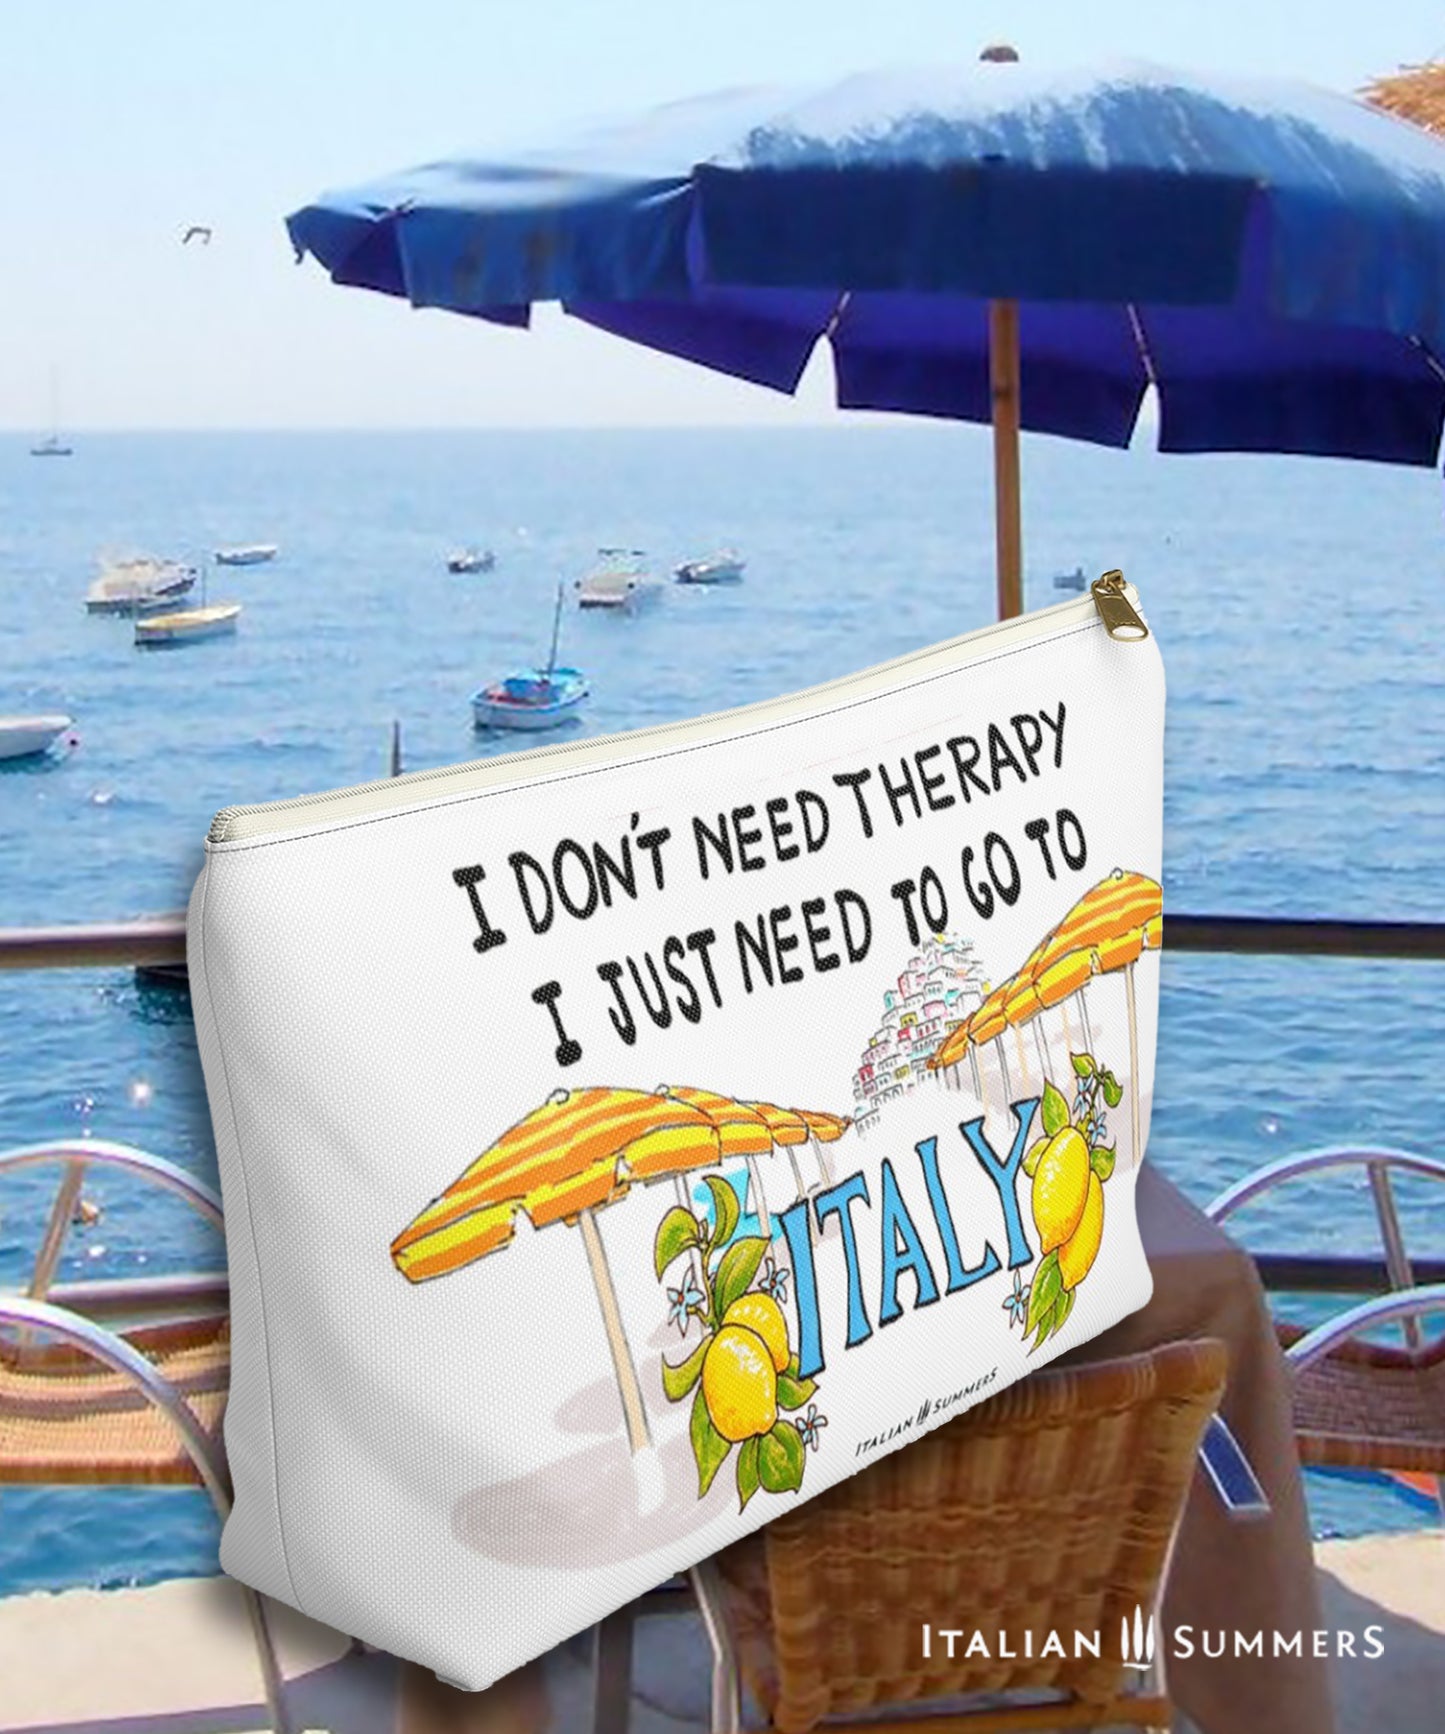 Italy inspired clutch of white canvas with he quote I don't need therapy, I just need to go to Italy. On the clutch there is a sketch of the beach umbrellas on Positano beach The beach umbrellas are yellow and orange striped. In the distance you ccan see the stagered houses of Positano. The word Italy in in big blue letters and is flancked with lemons. Designed by Italian Summers.